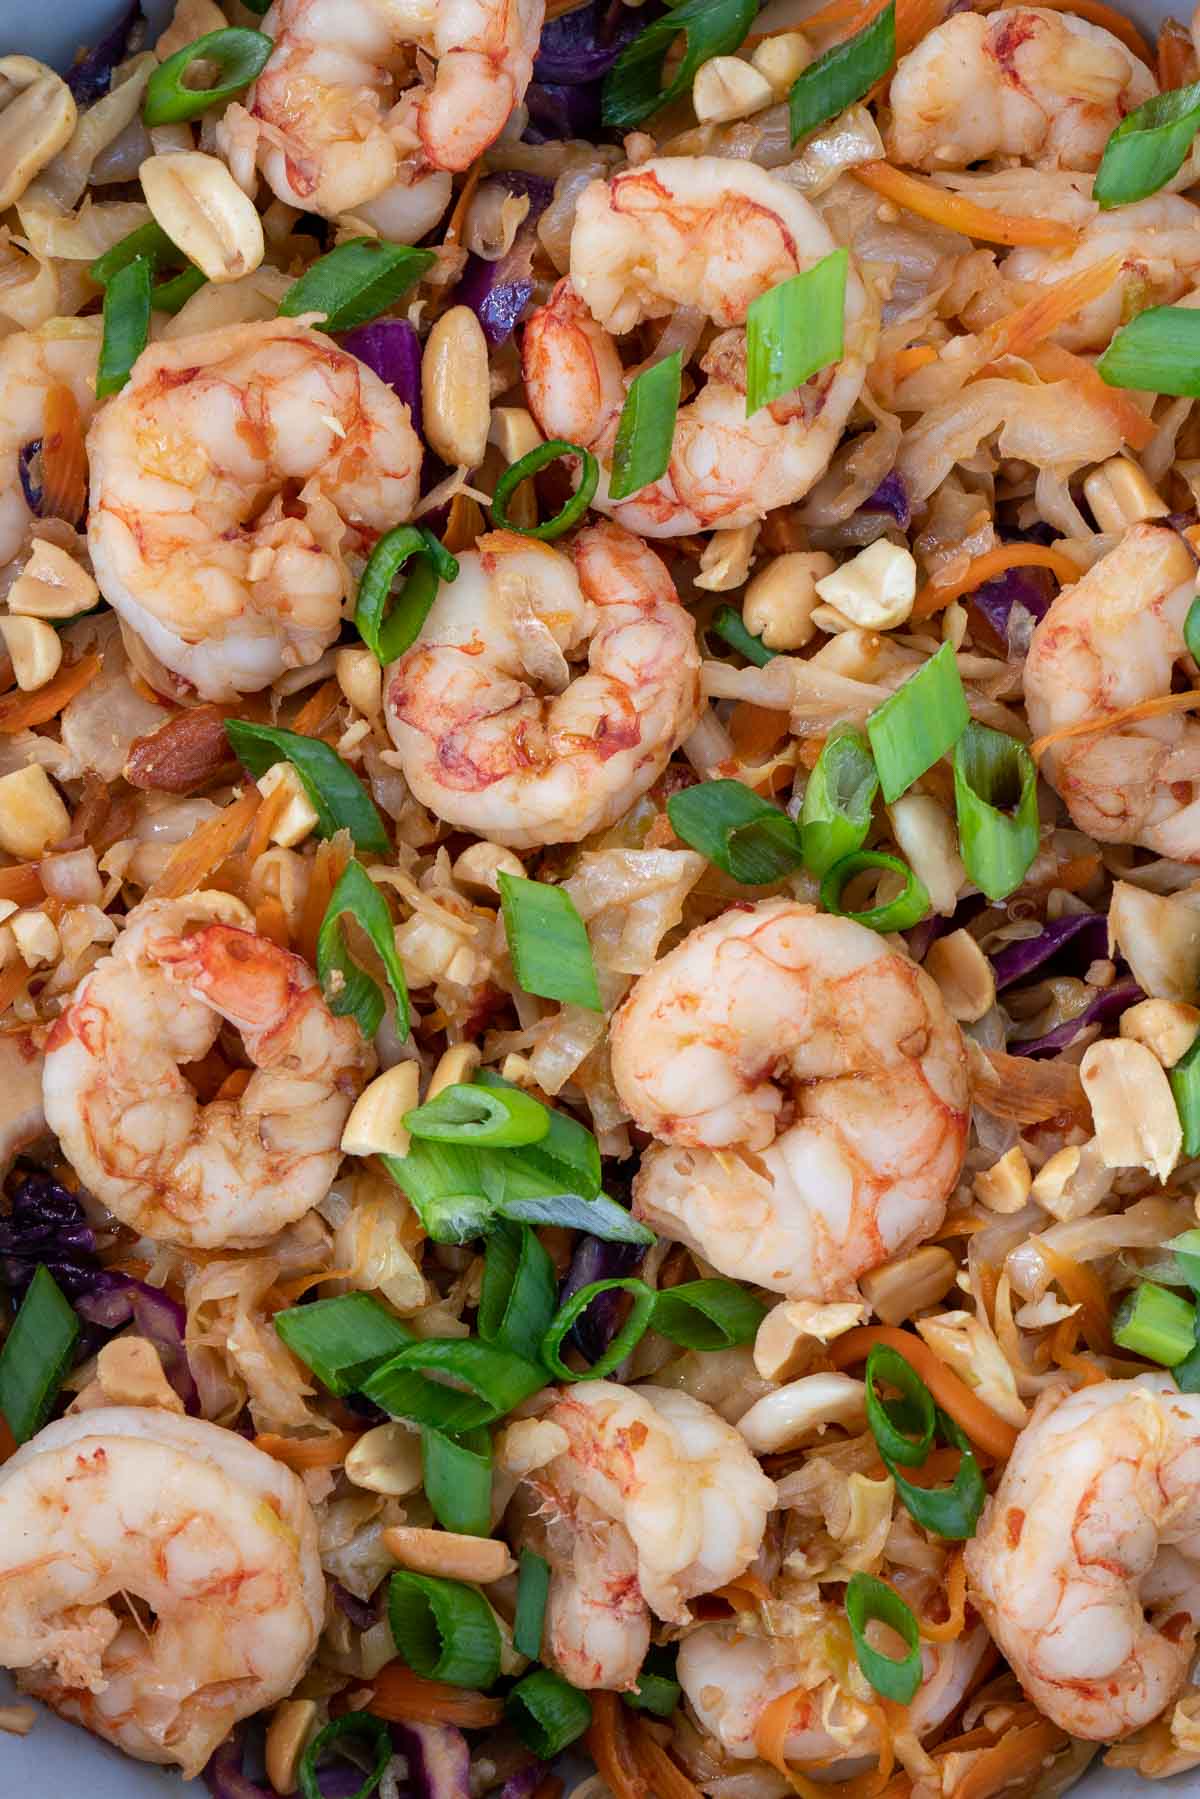 Overhead view of shrimp stir fry topped with scallions